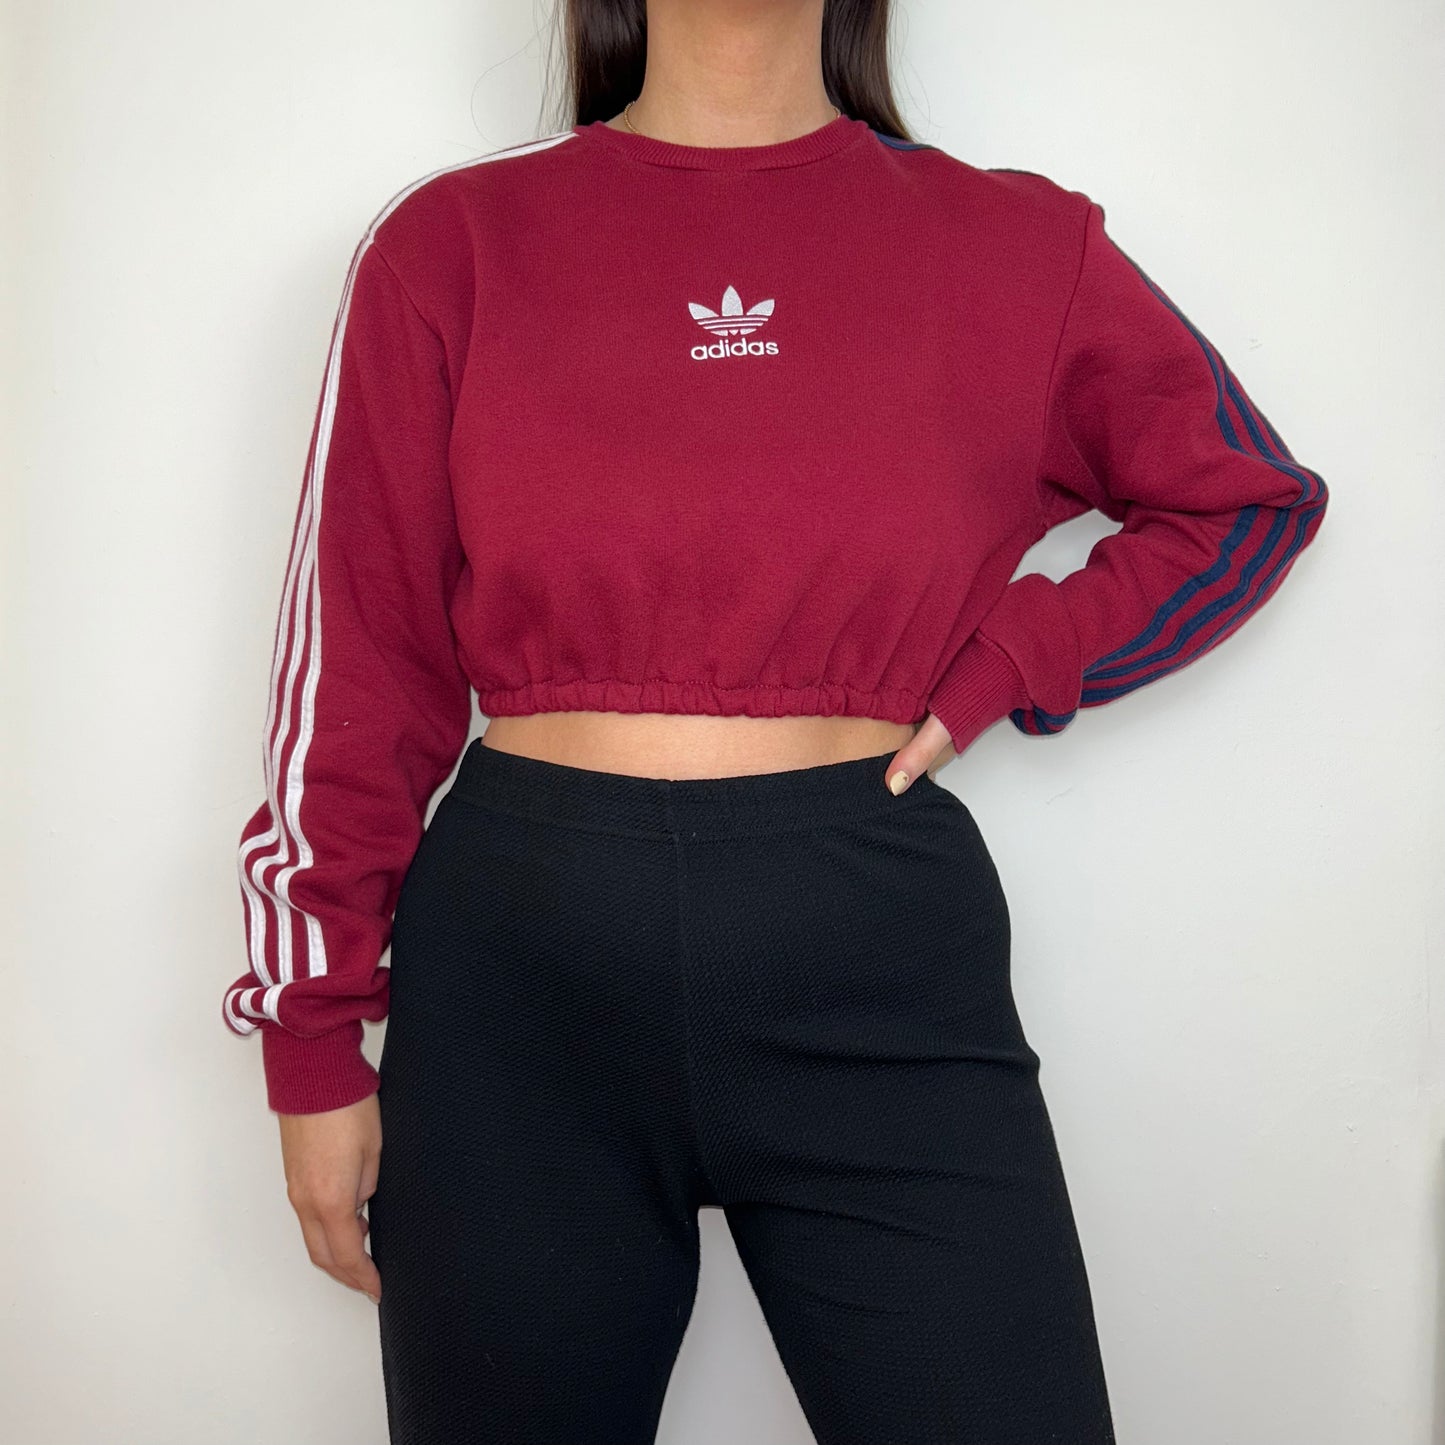 burgundy cropped sweatshirt with white adidas logo shown on a model wearing black trousers